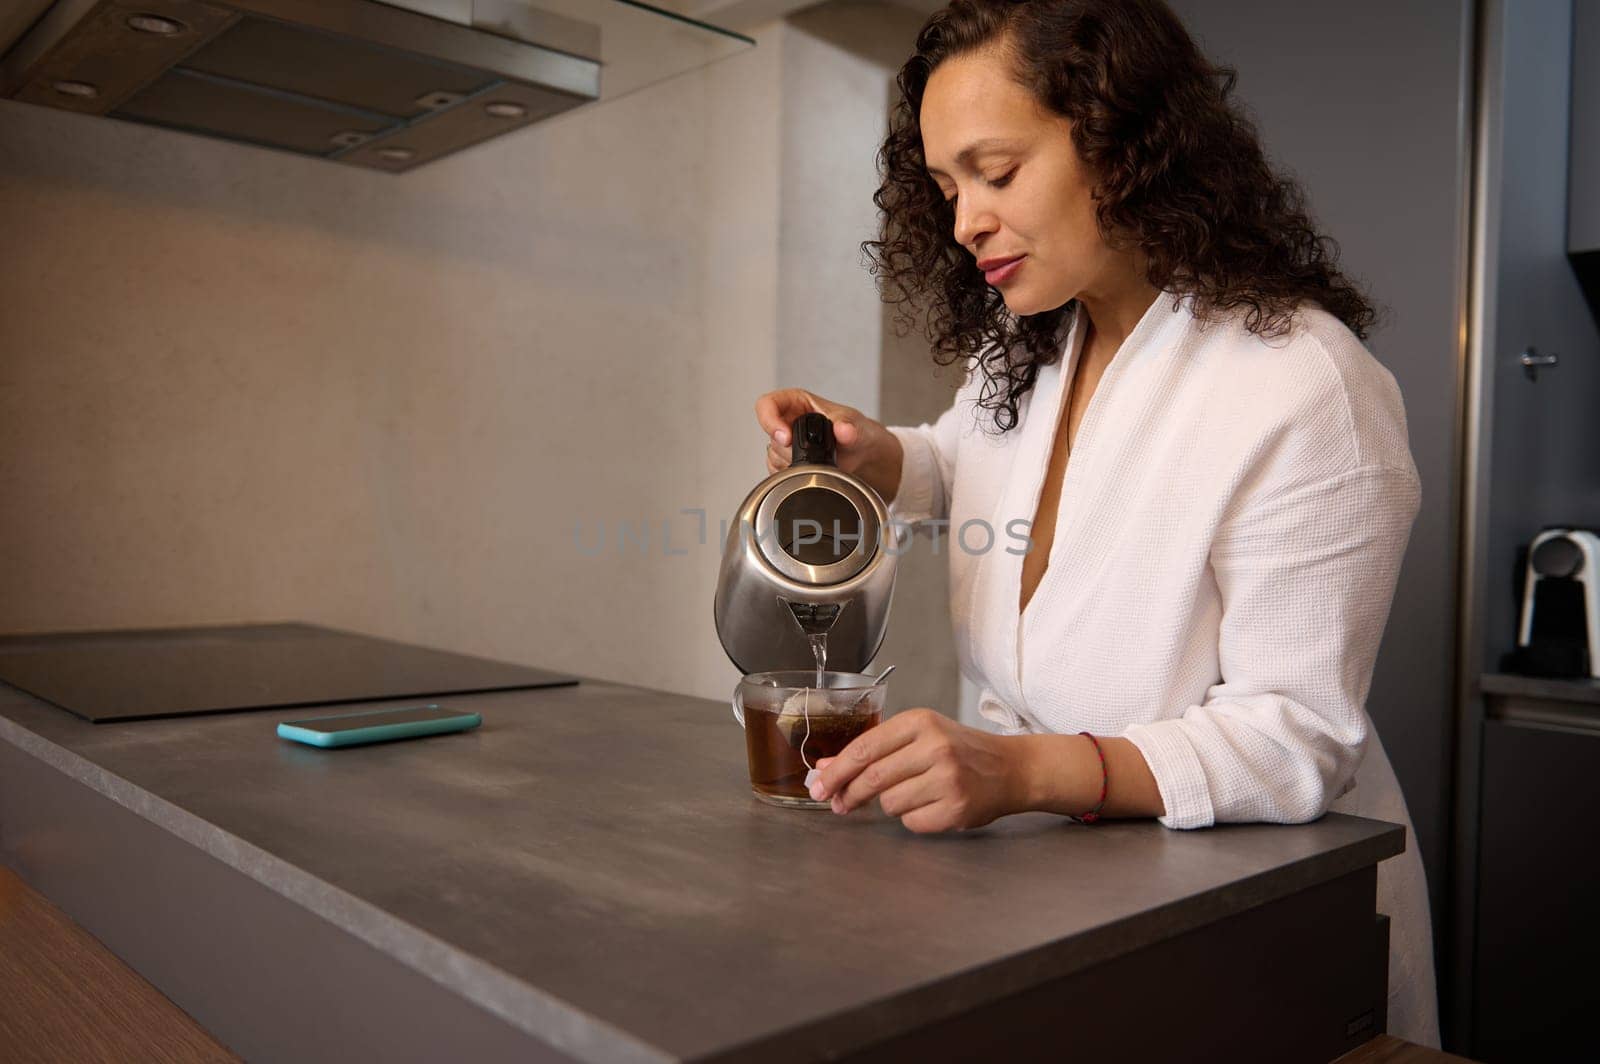 Young woman making tea for breakfast. Attractive lady on white bathrobe pouring boiled water from an electric teapot into a glass with teabag by artgf